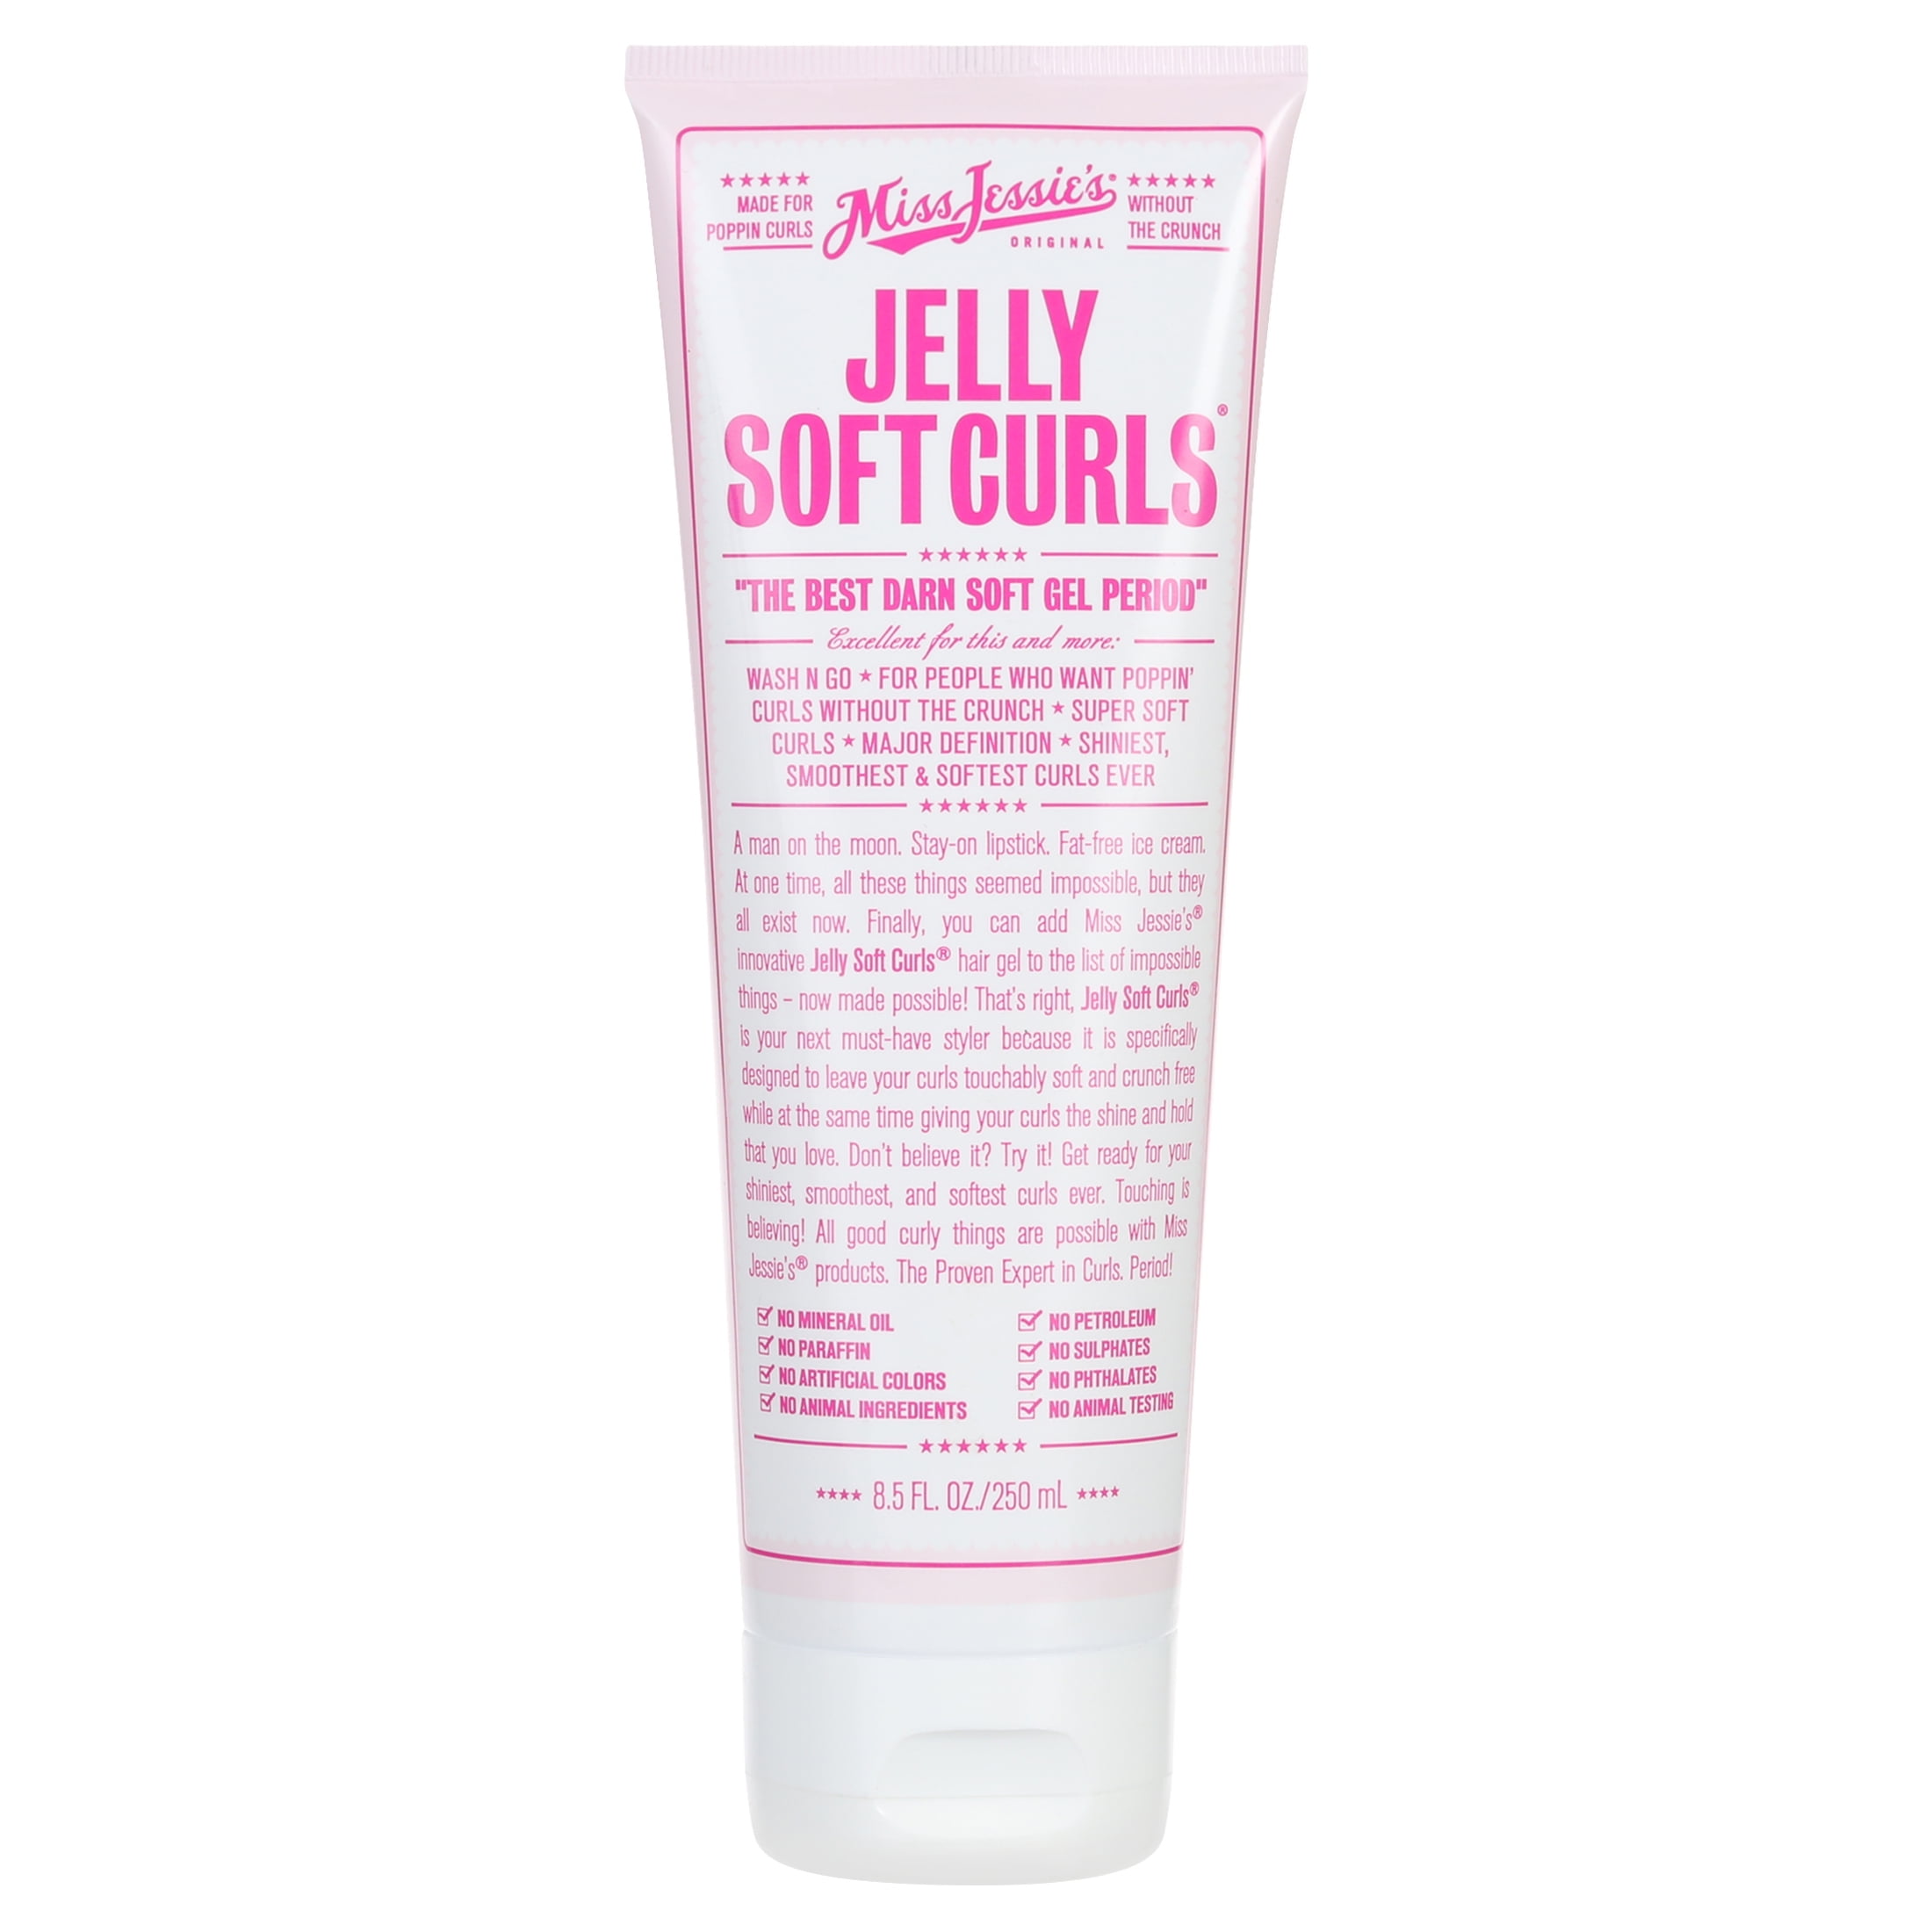 MISS JESSIE'S Jelly Soft Curls Enhancing Squeeze Hair Styling Gel, 8.5 fl oz